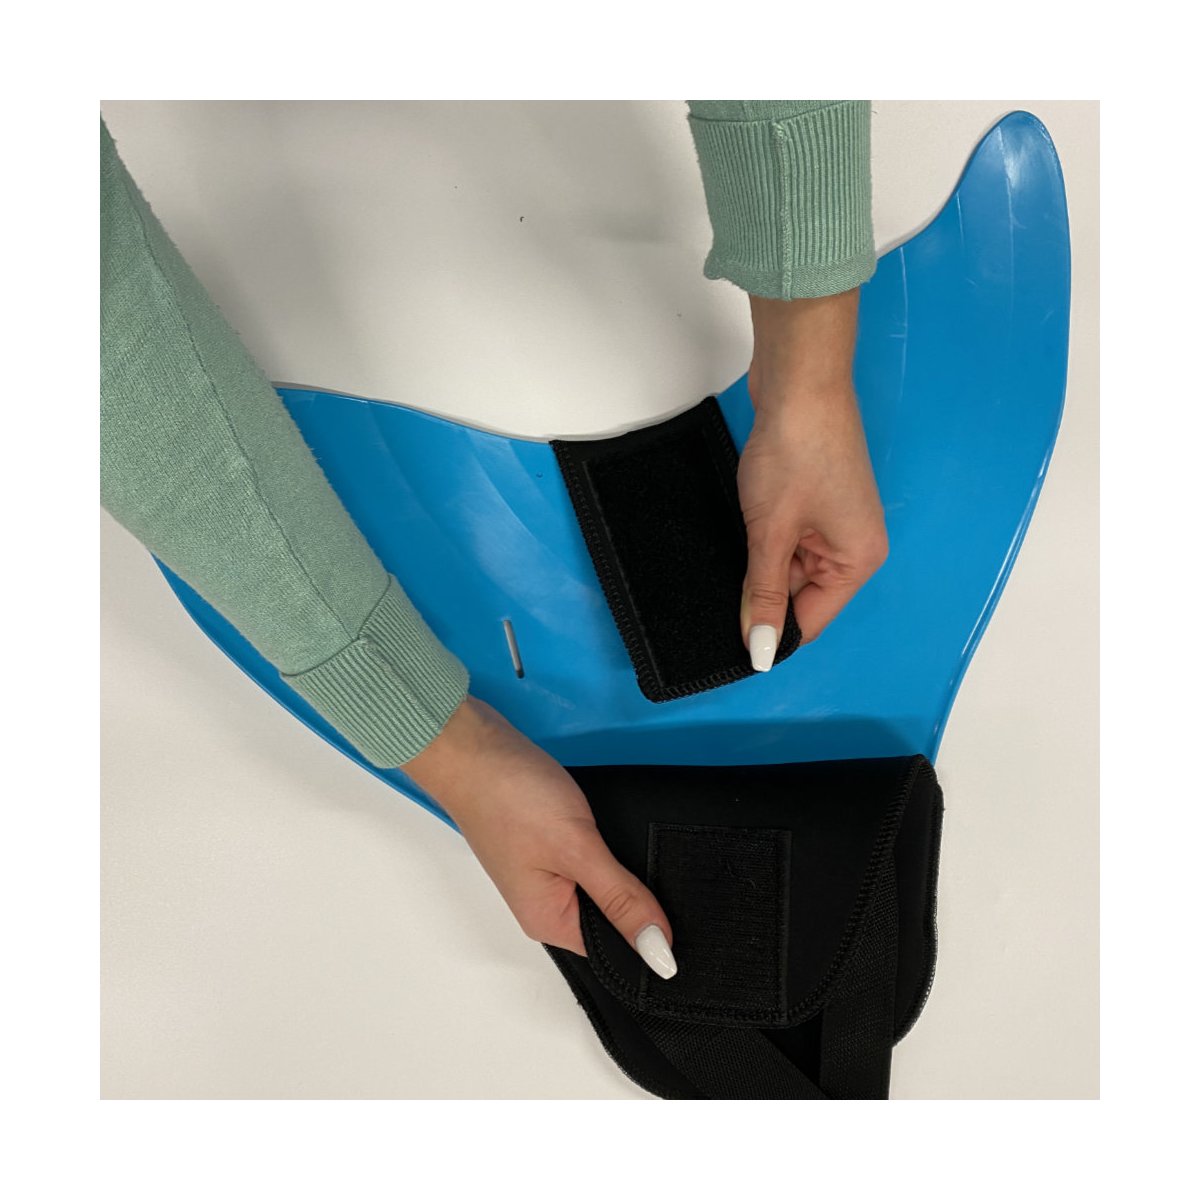 Monofin with a neoprene foot pocket - for a safe and comfortable swim! - Monofin with a neoprene foot pocket